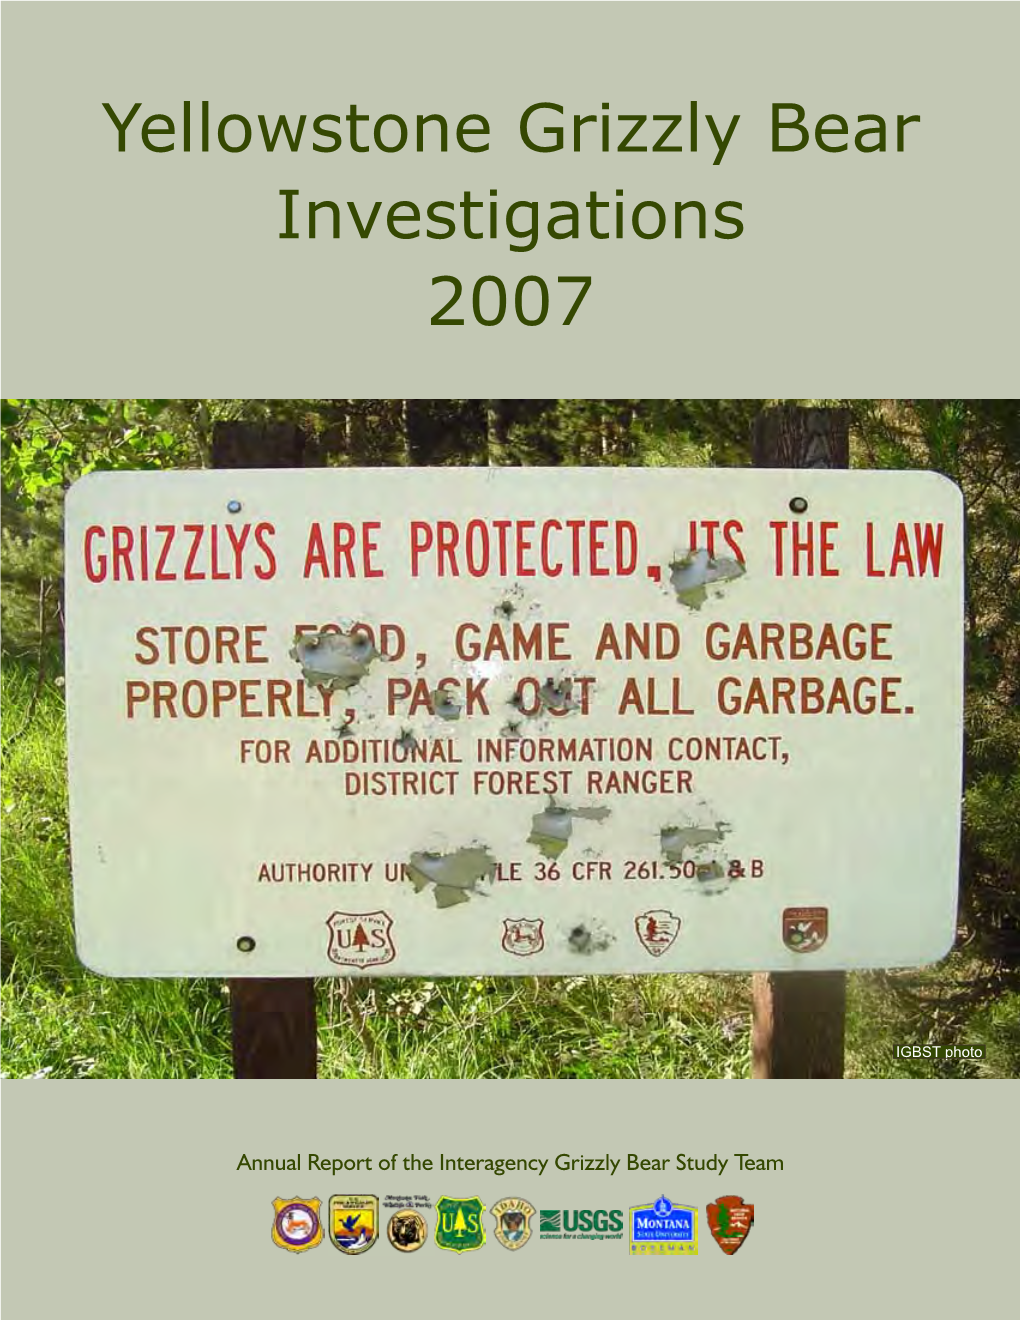 Yellowstone Grizzly Bear Investigations 2007